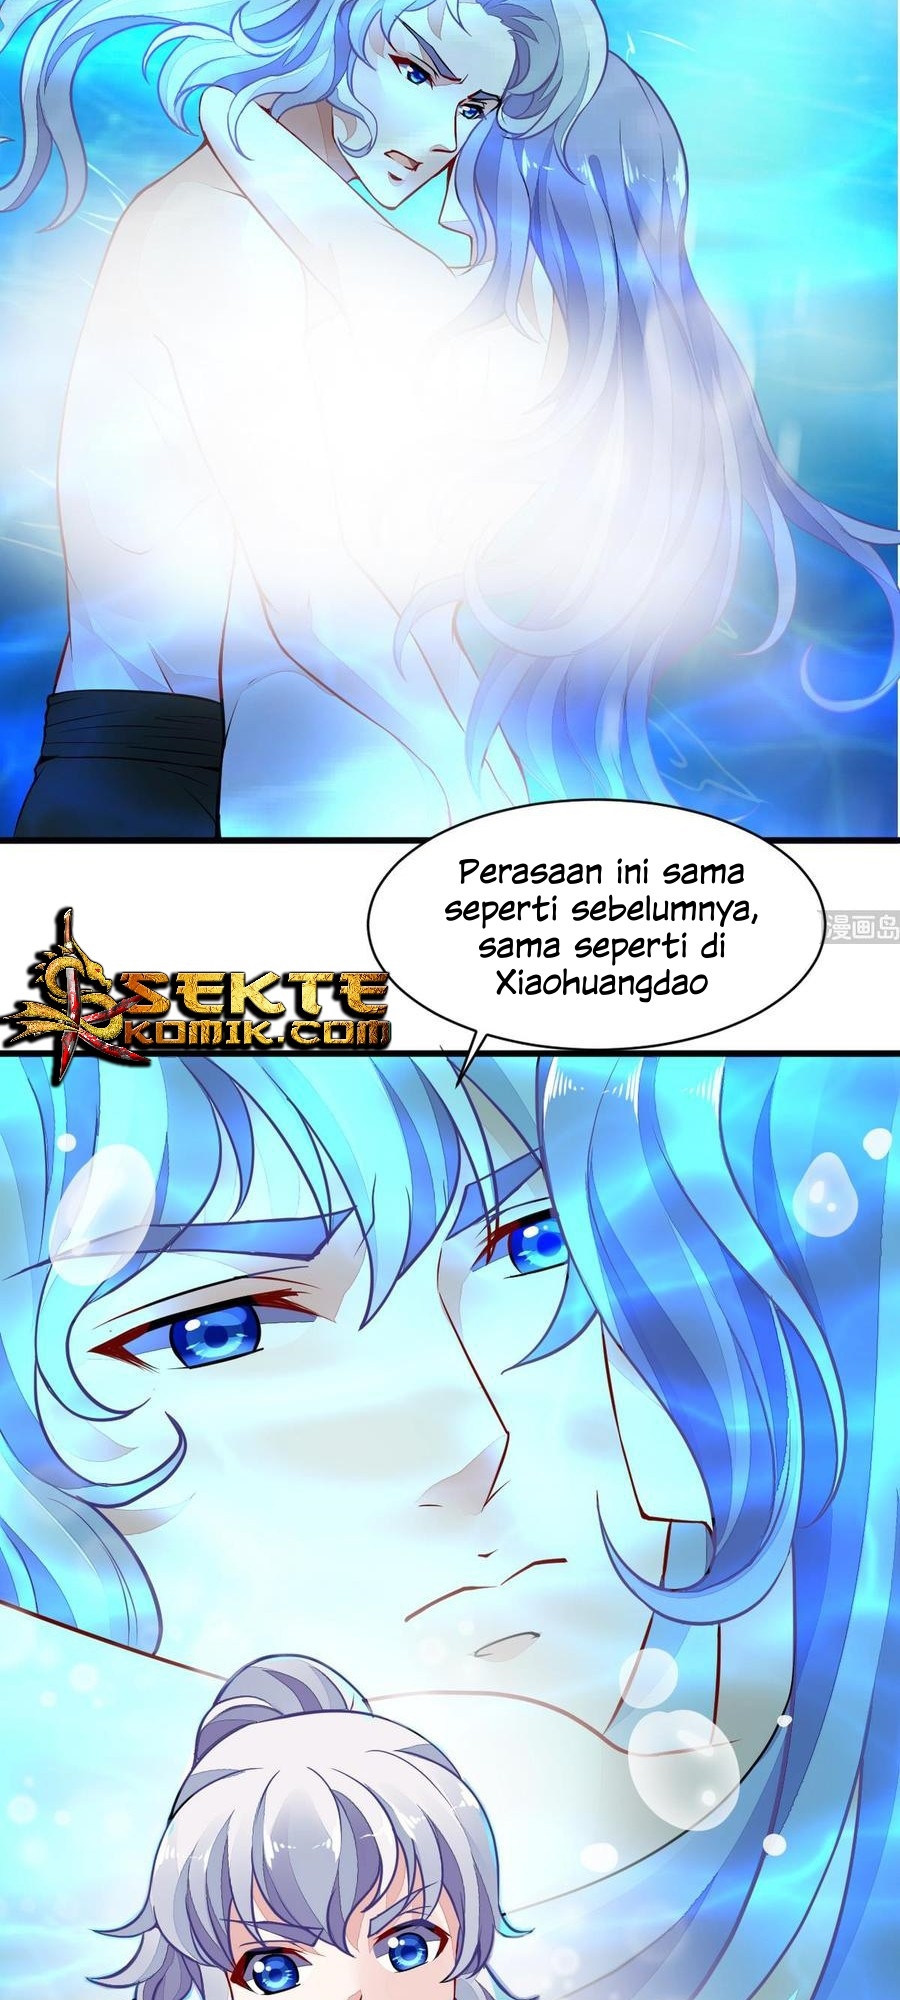 King of the Gods Chapter 45